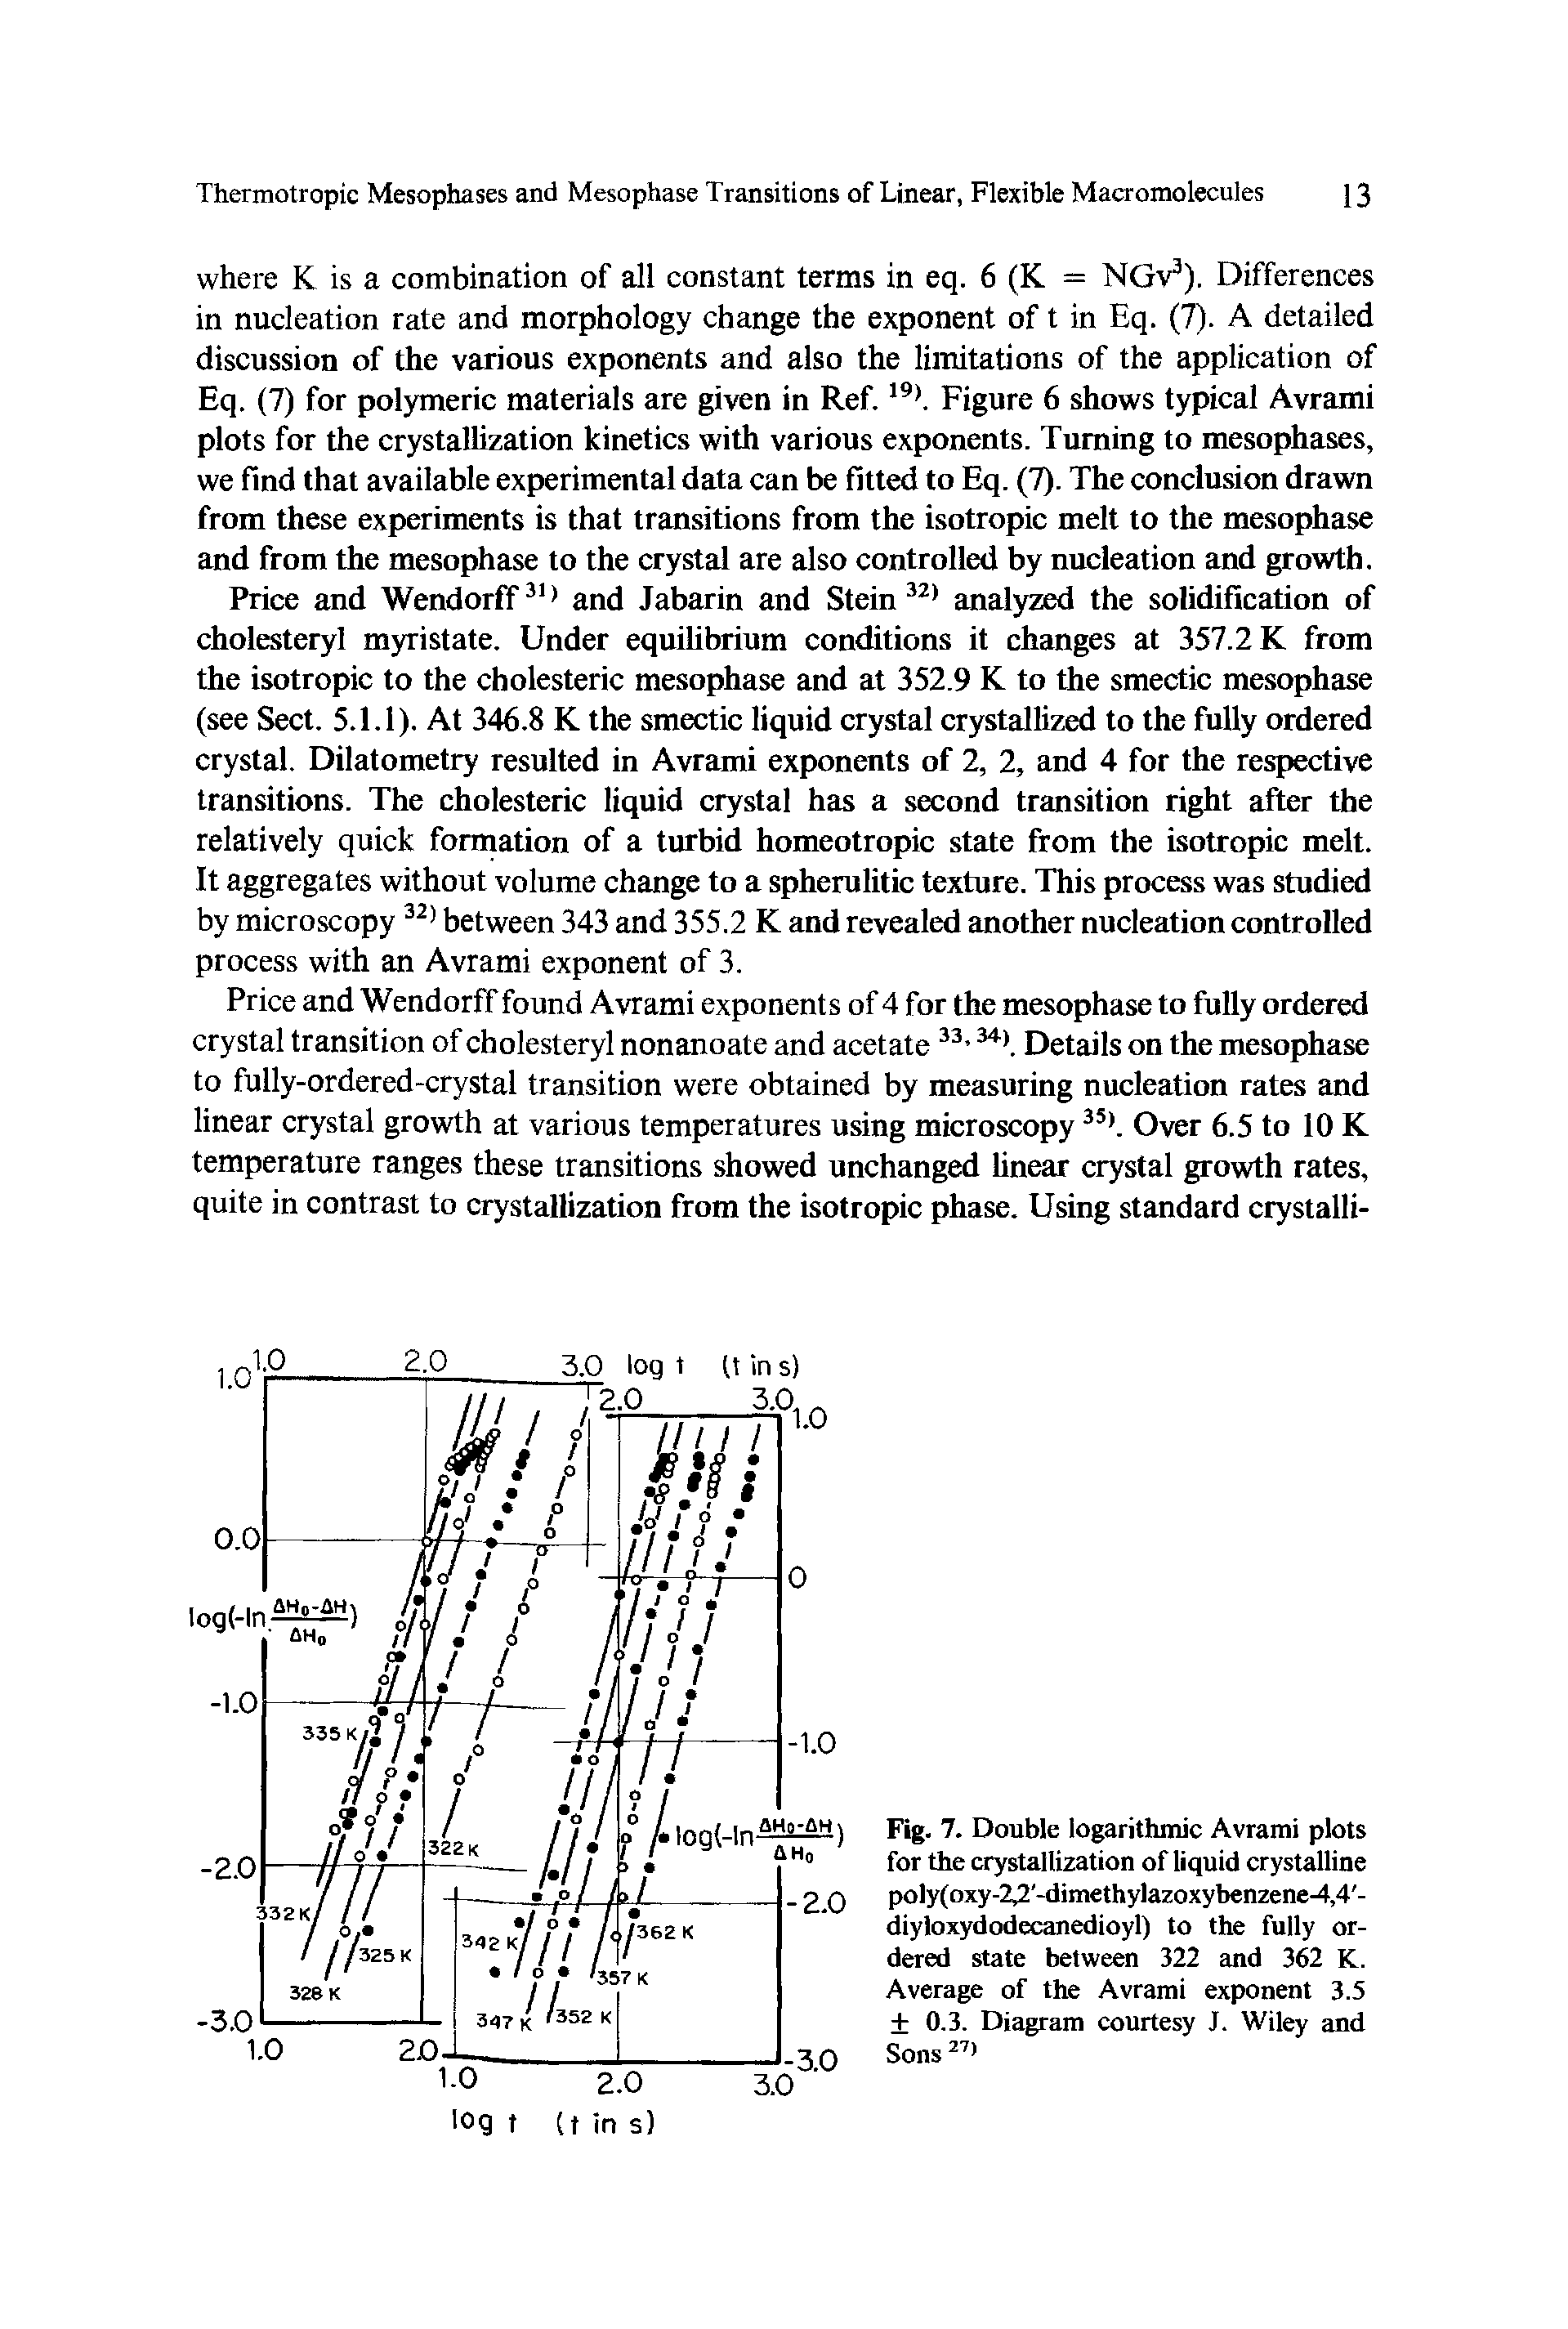 Fig. 7. Double logarithmic Avrami plots for the crystallization of liquid crystalline poly(oxy-2 -dimethylazoxybenzene-4,4 -diyloxydodecanedioyl) to the fully ordered state between 322 and 362 K. Average of the Avrami exponent 3.5 0.3. Diagram courtesy J. Wiley and Sons27 ...